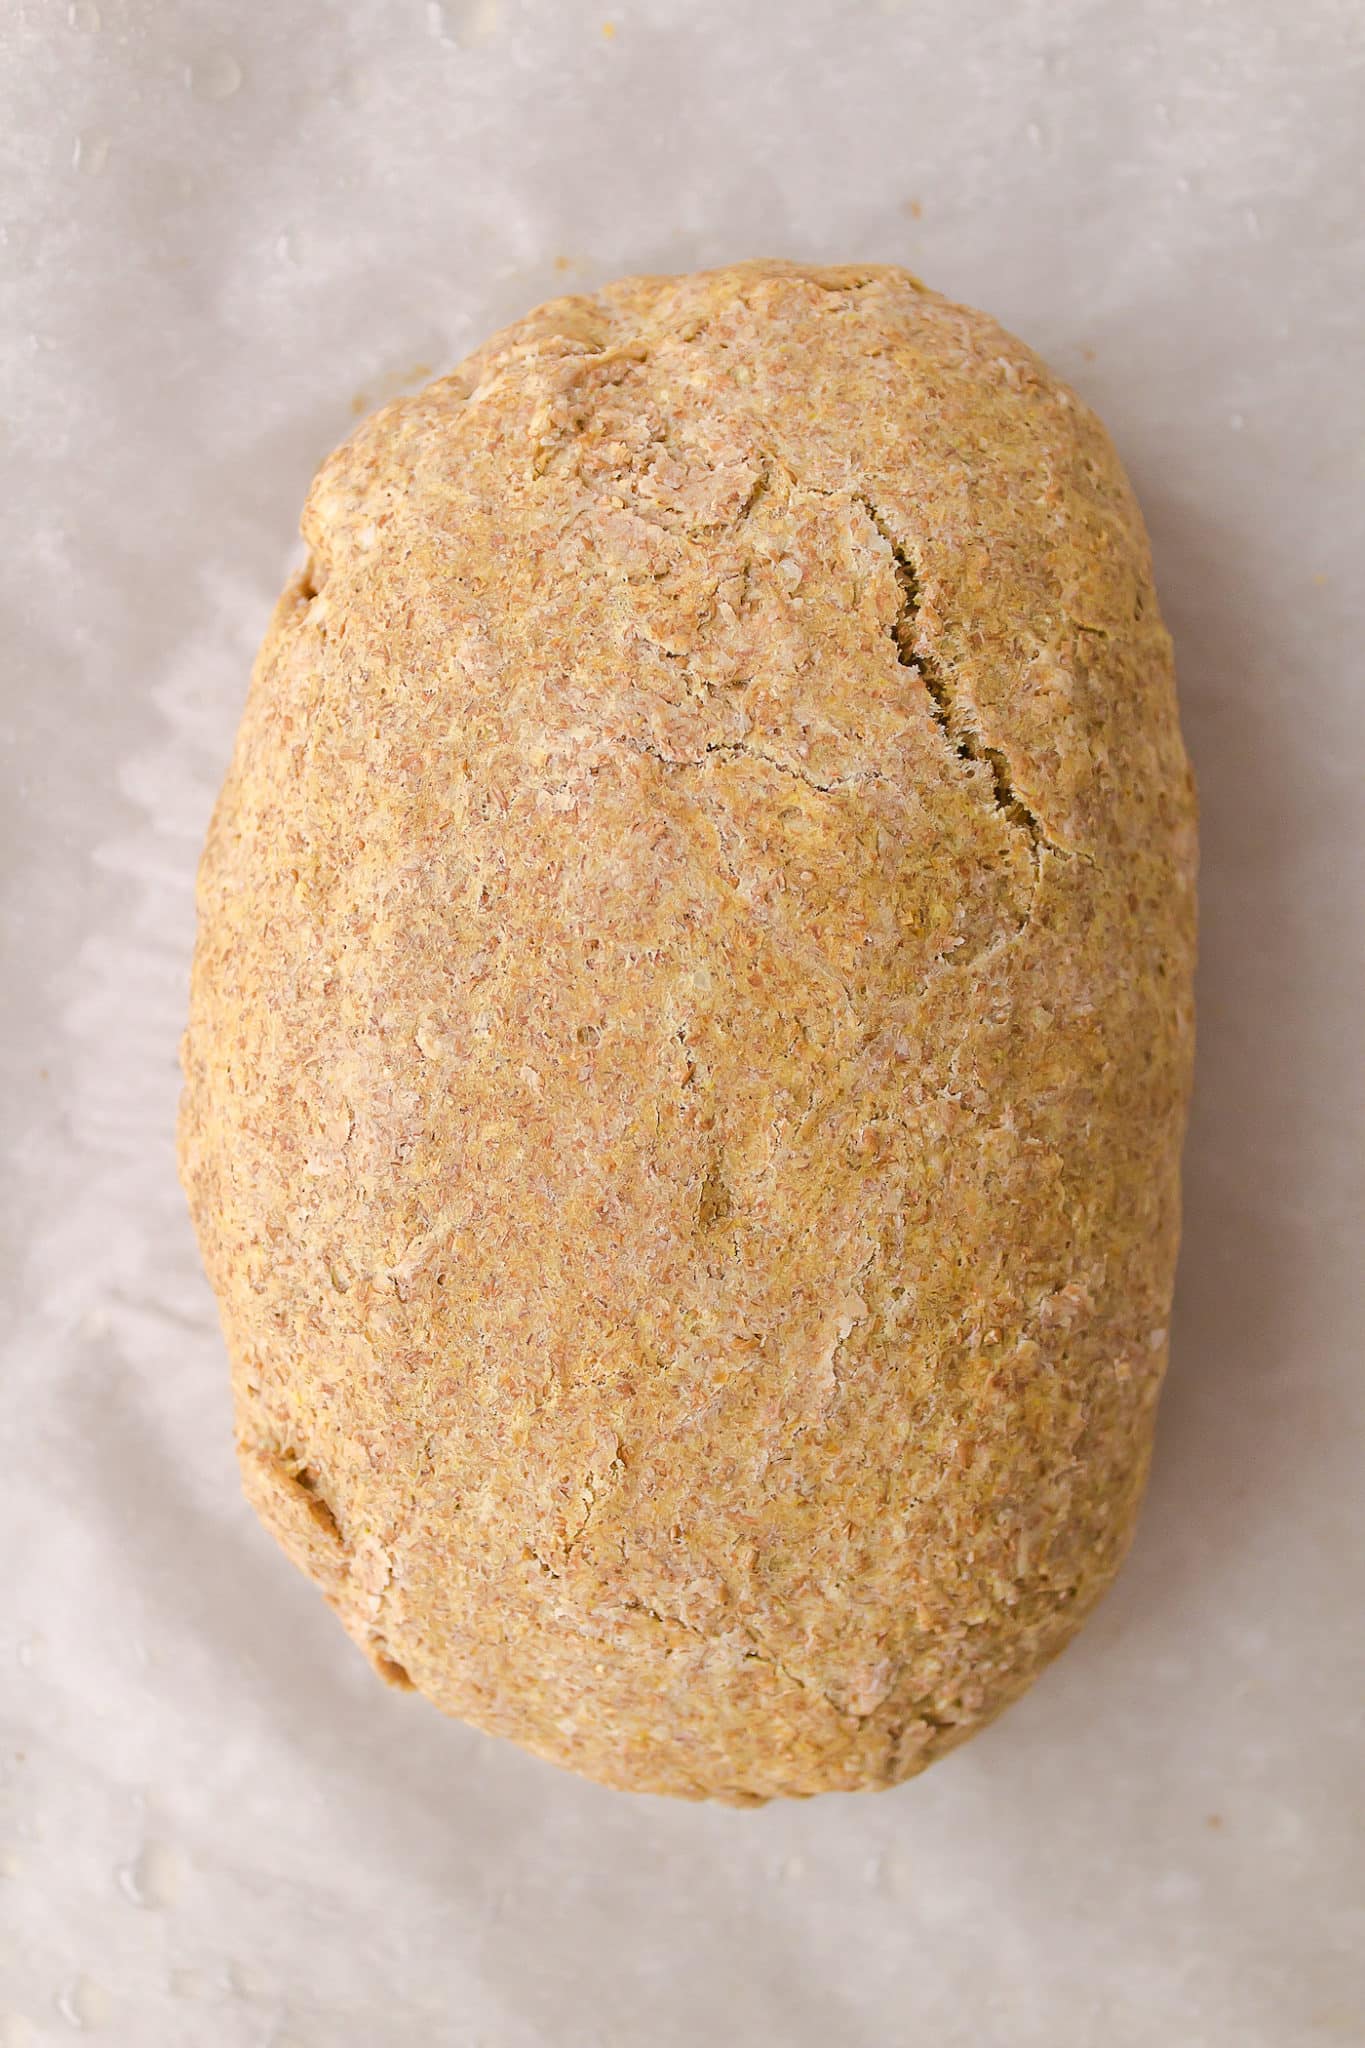 round baked loaf of buckwheat bread.